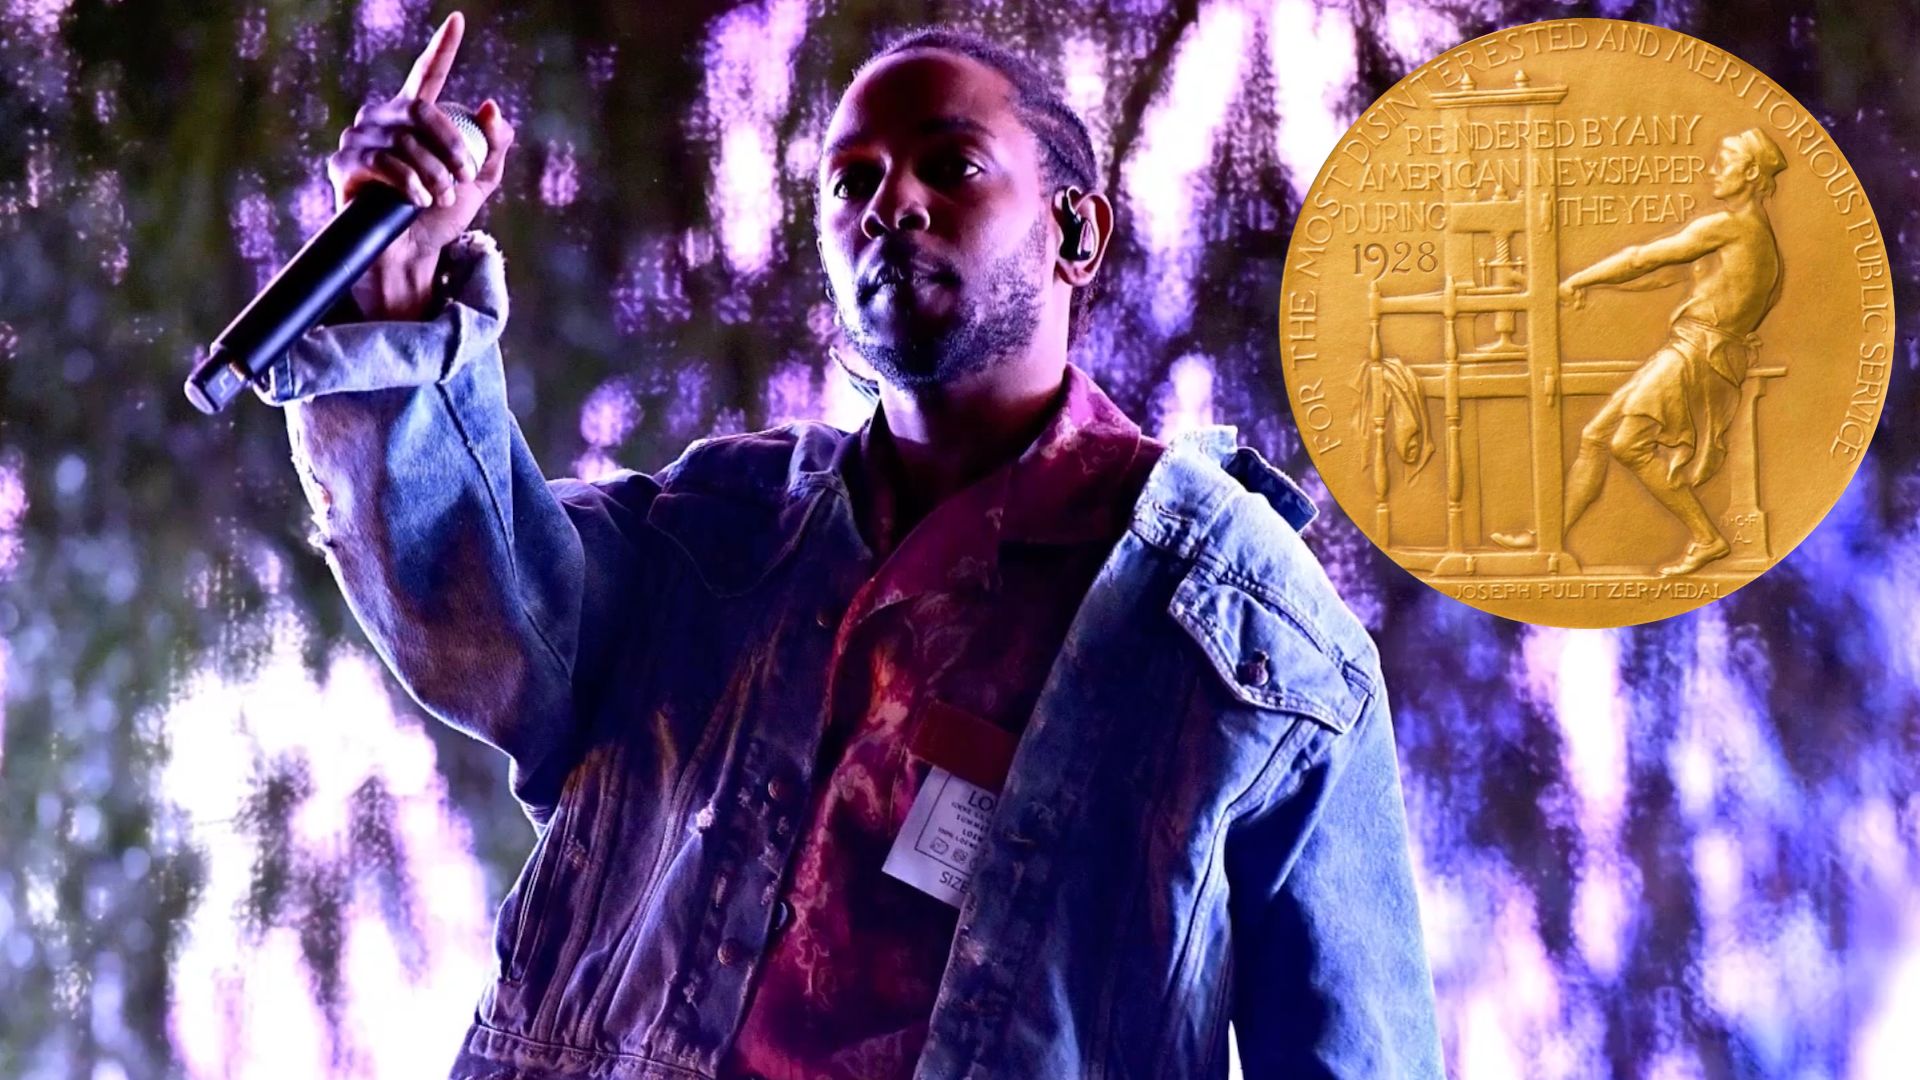 Watch How Kendrick Lamar Won the Pulitzer Prize and What It Means